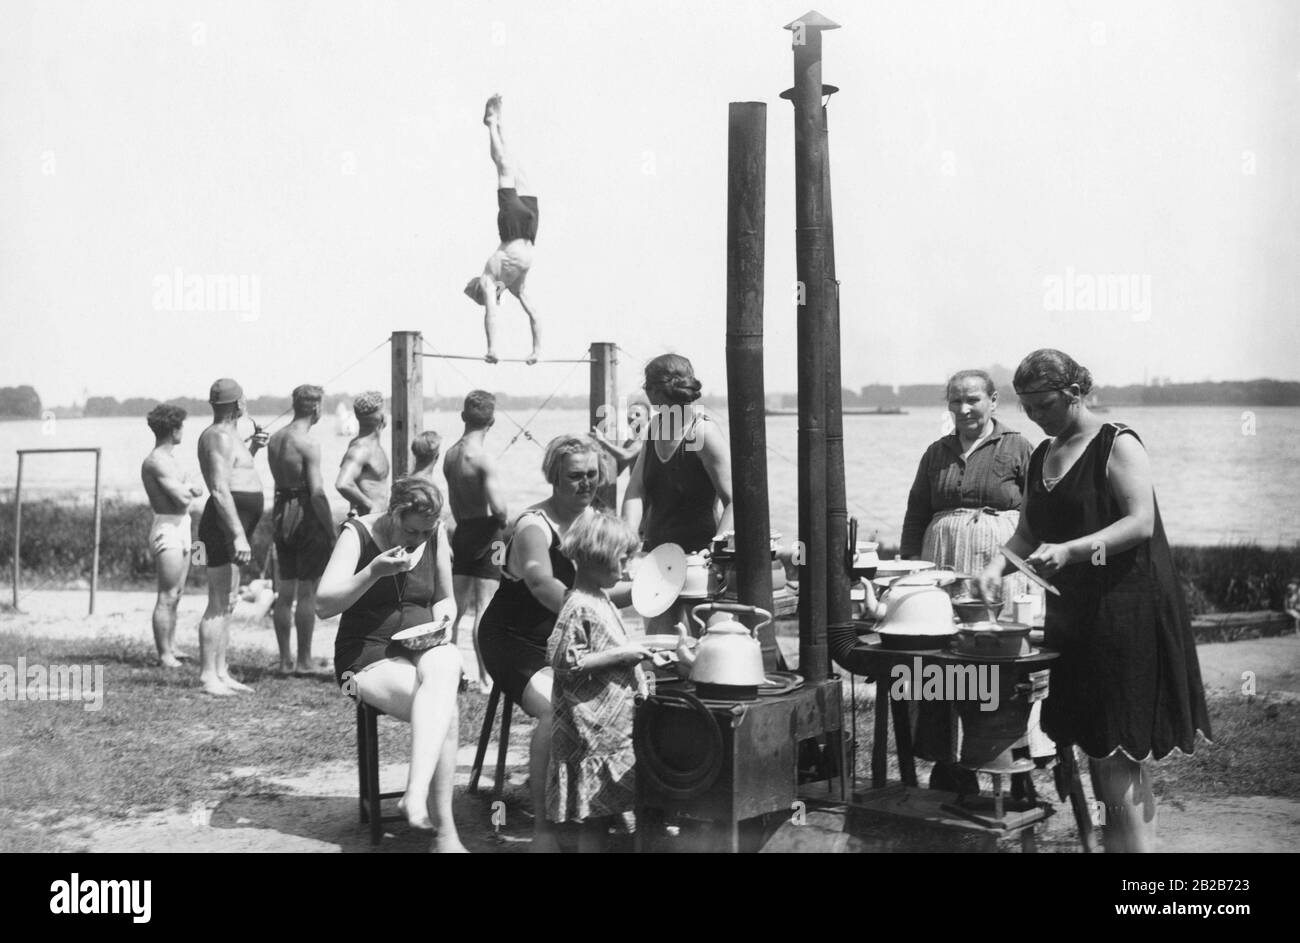 Campers gather around a cooking area with several ovens and prepare food in the Tegel tent camp at Lake Tegel. In the meantime, the men watch as one of them exercises on a horizontal bar. Stock Photo